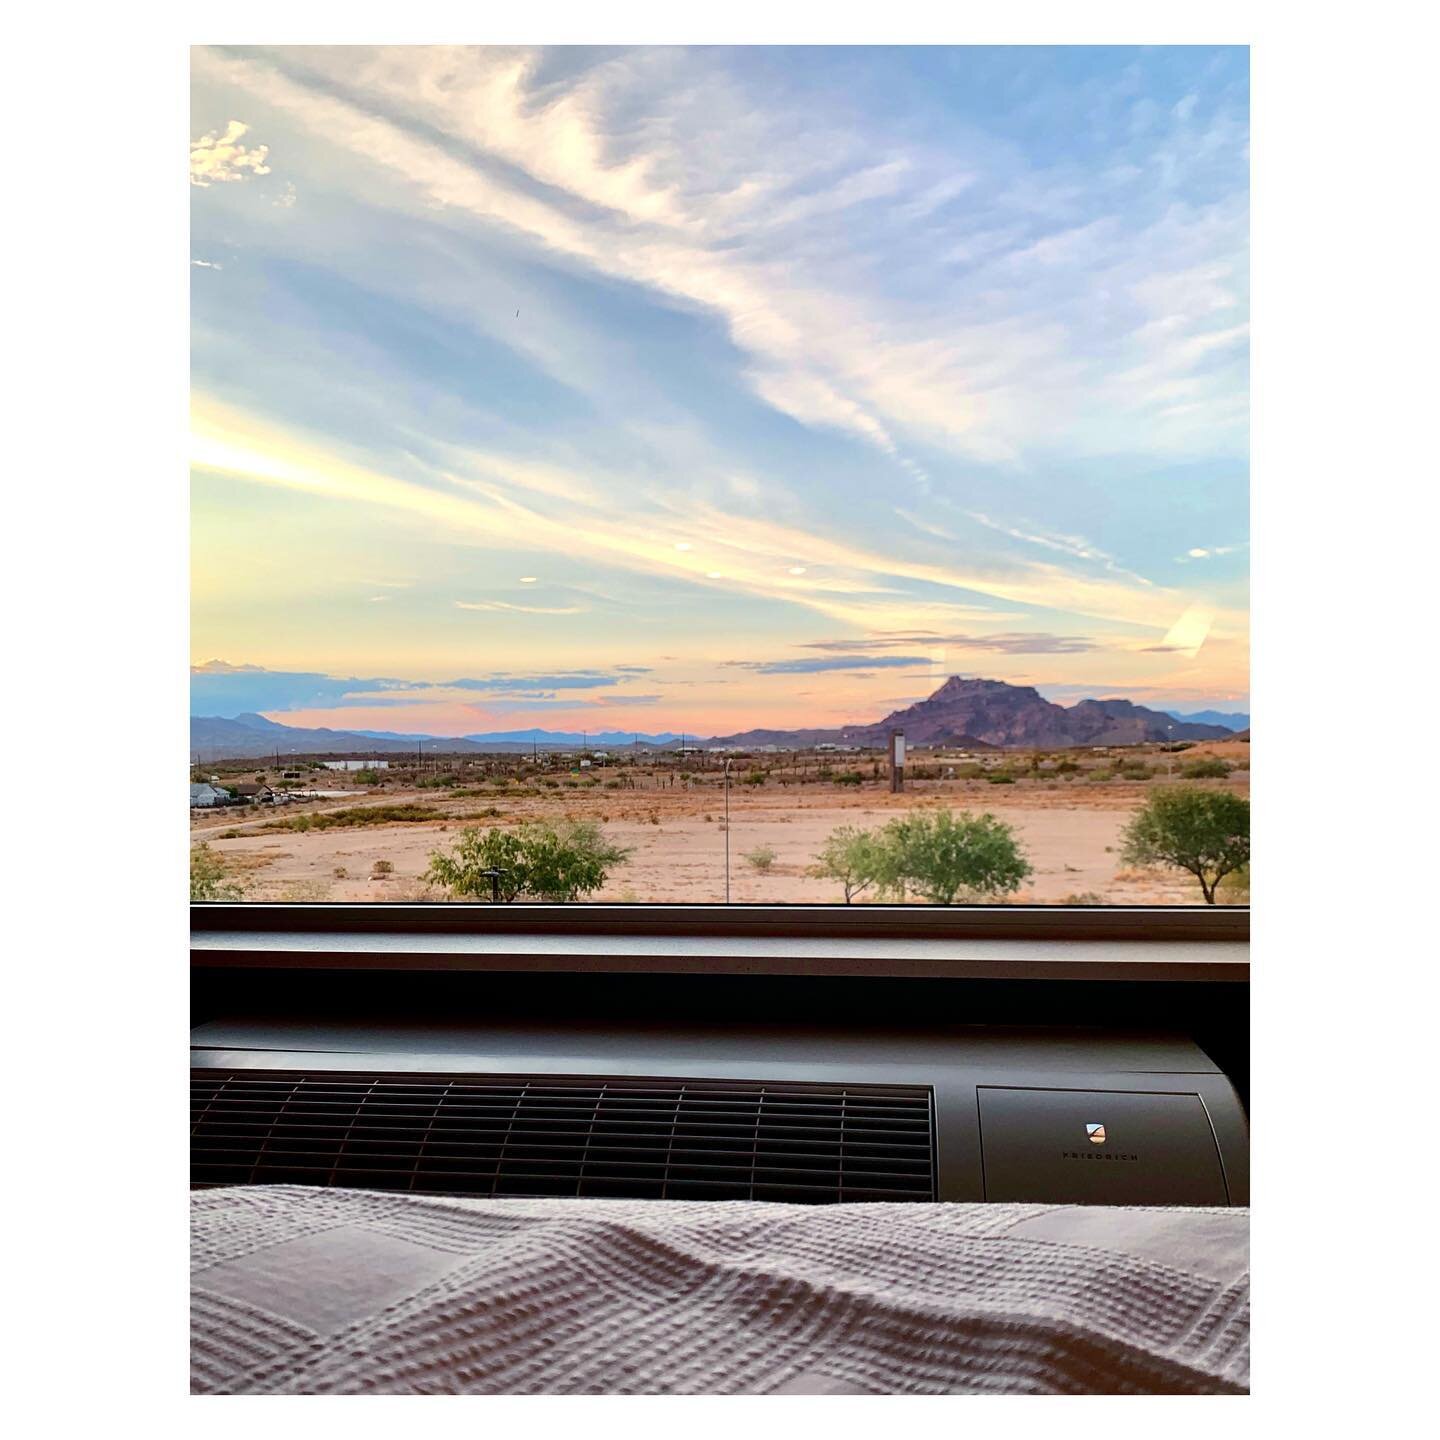 One of our clients, @home2suitesmesa is officially OPEN!! I mean&hellip; just check out this beautiful Arizona view from one of the guest rooms!! 

If you&rsquo;re visiting the Mesa, AZ area, be sure to stay at the brand new Home2 Suites Mesa! Locate